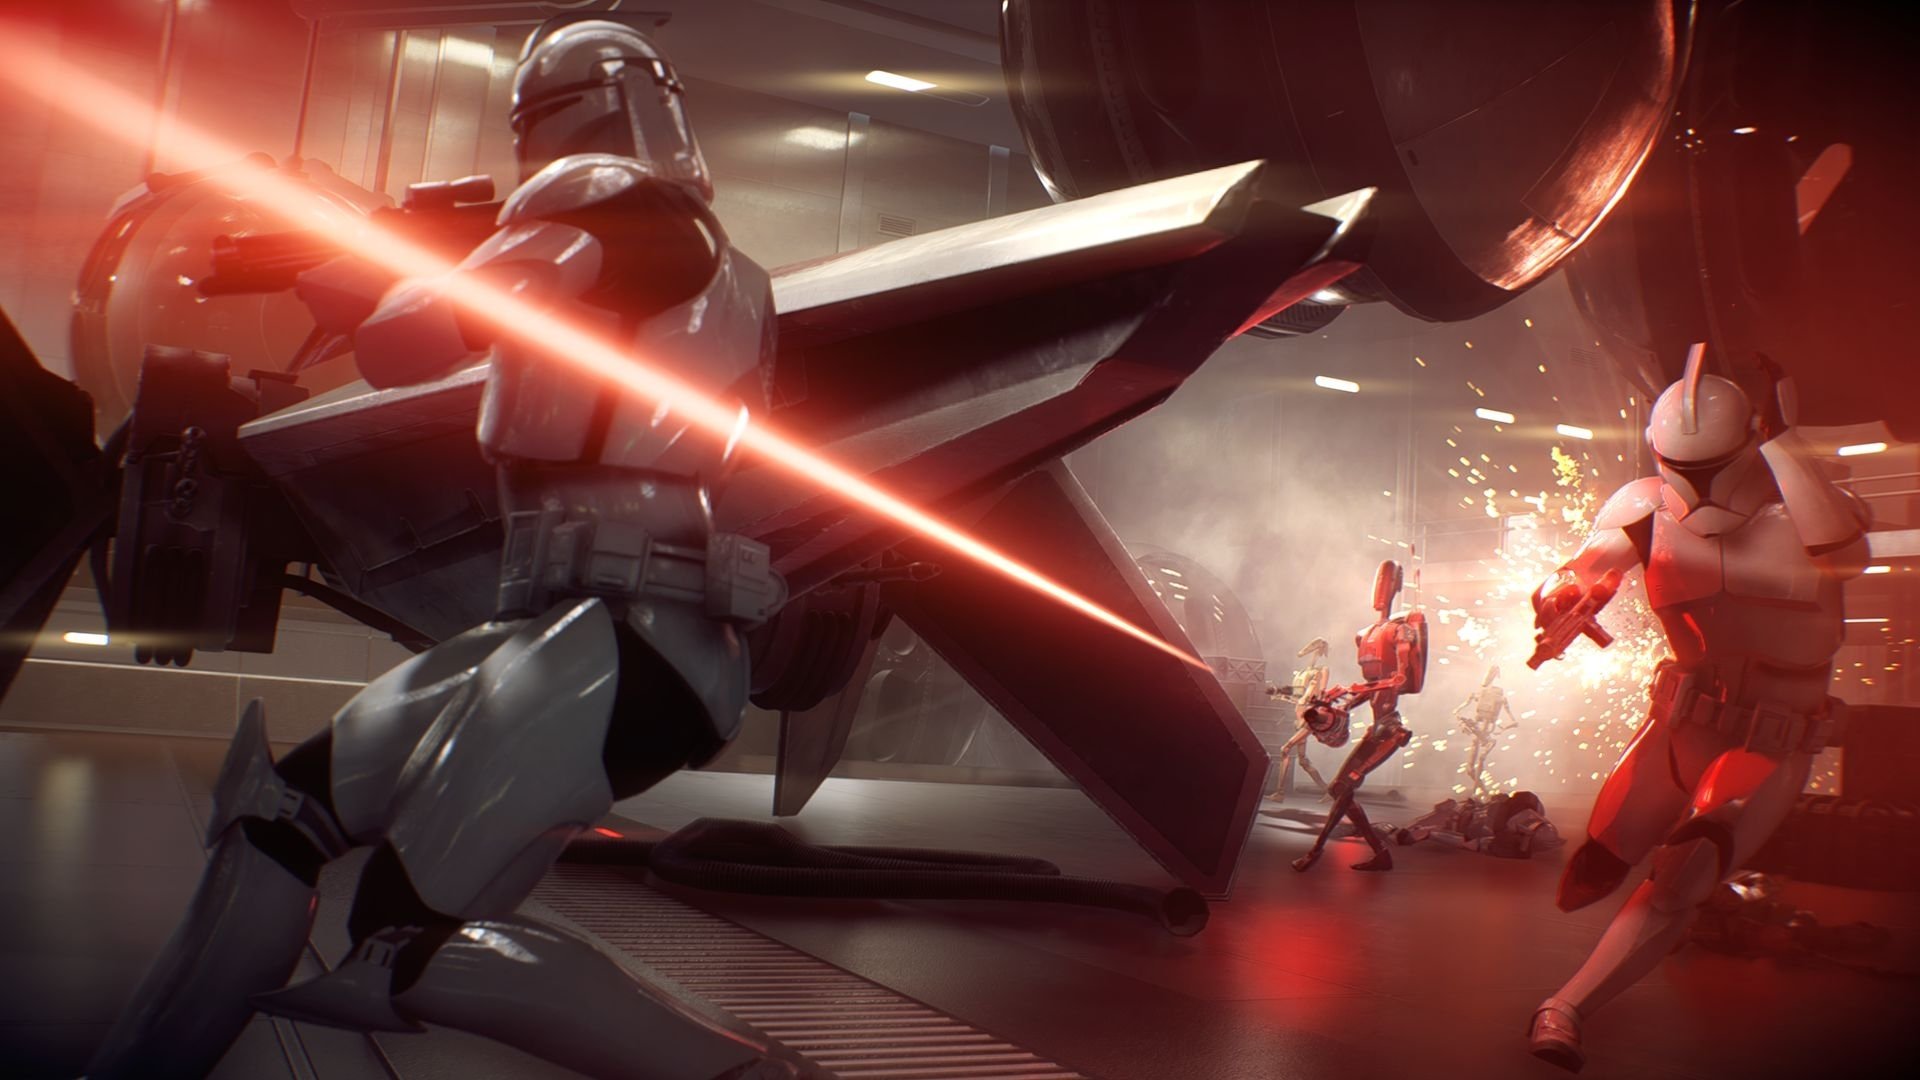 Star Wars Battlefront II - Download for PC Free